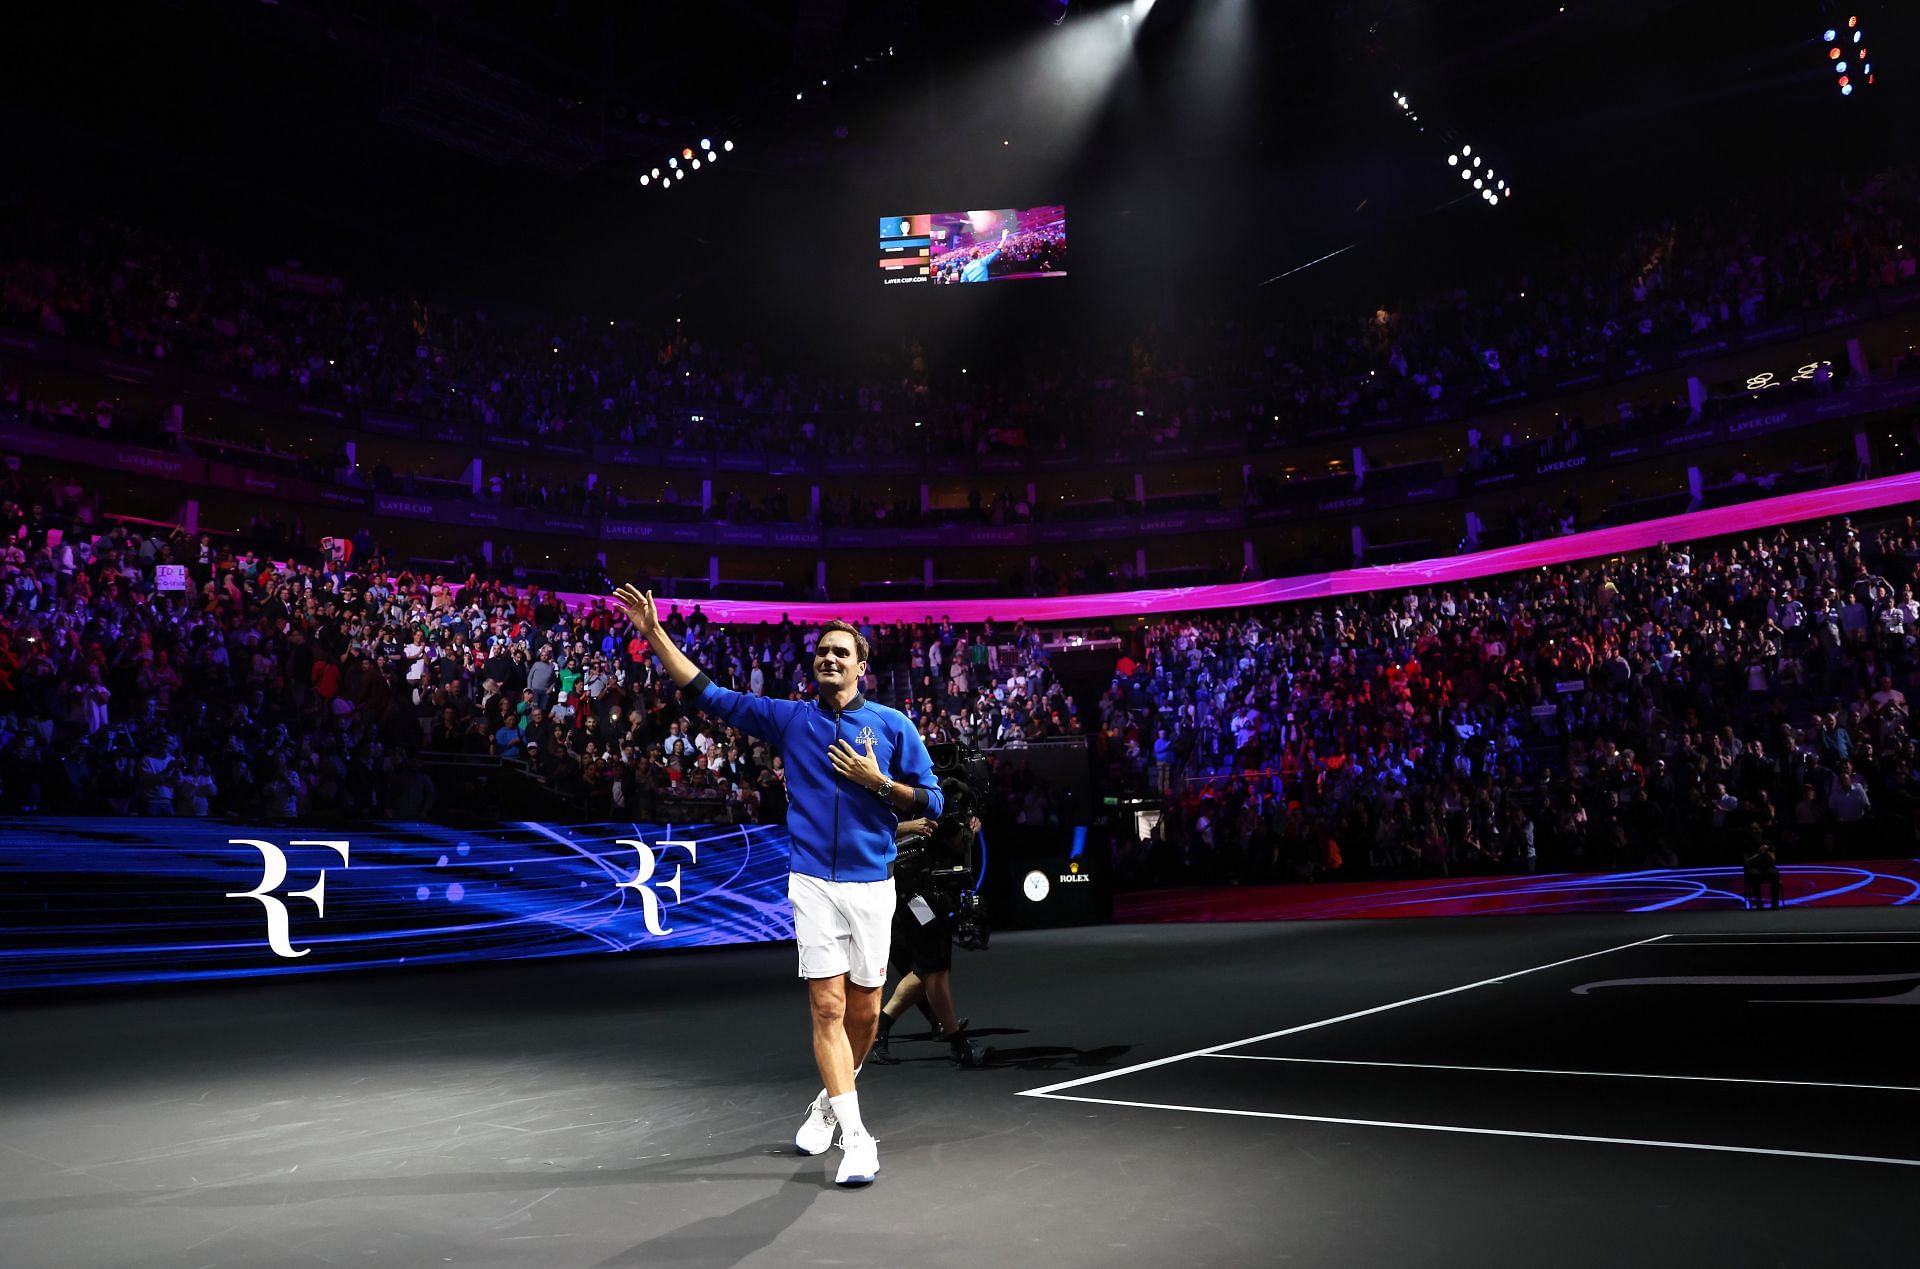 Roger Federer acknowledging his fans duirng his farewell at the Laver Cup